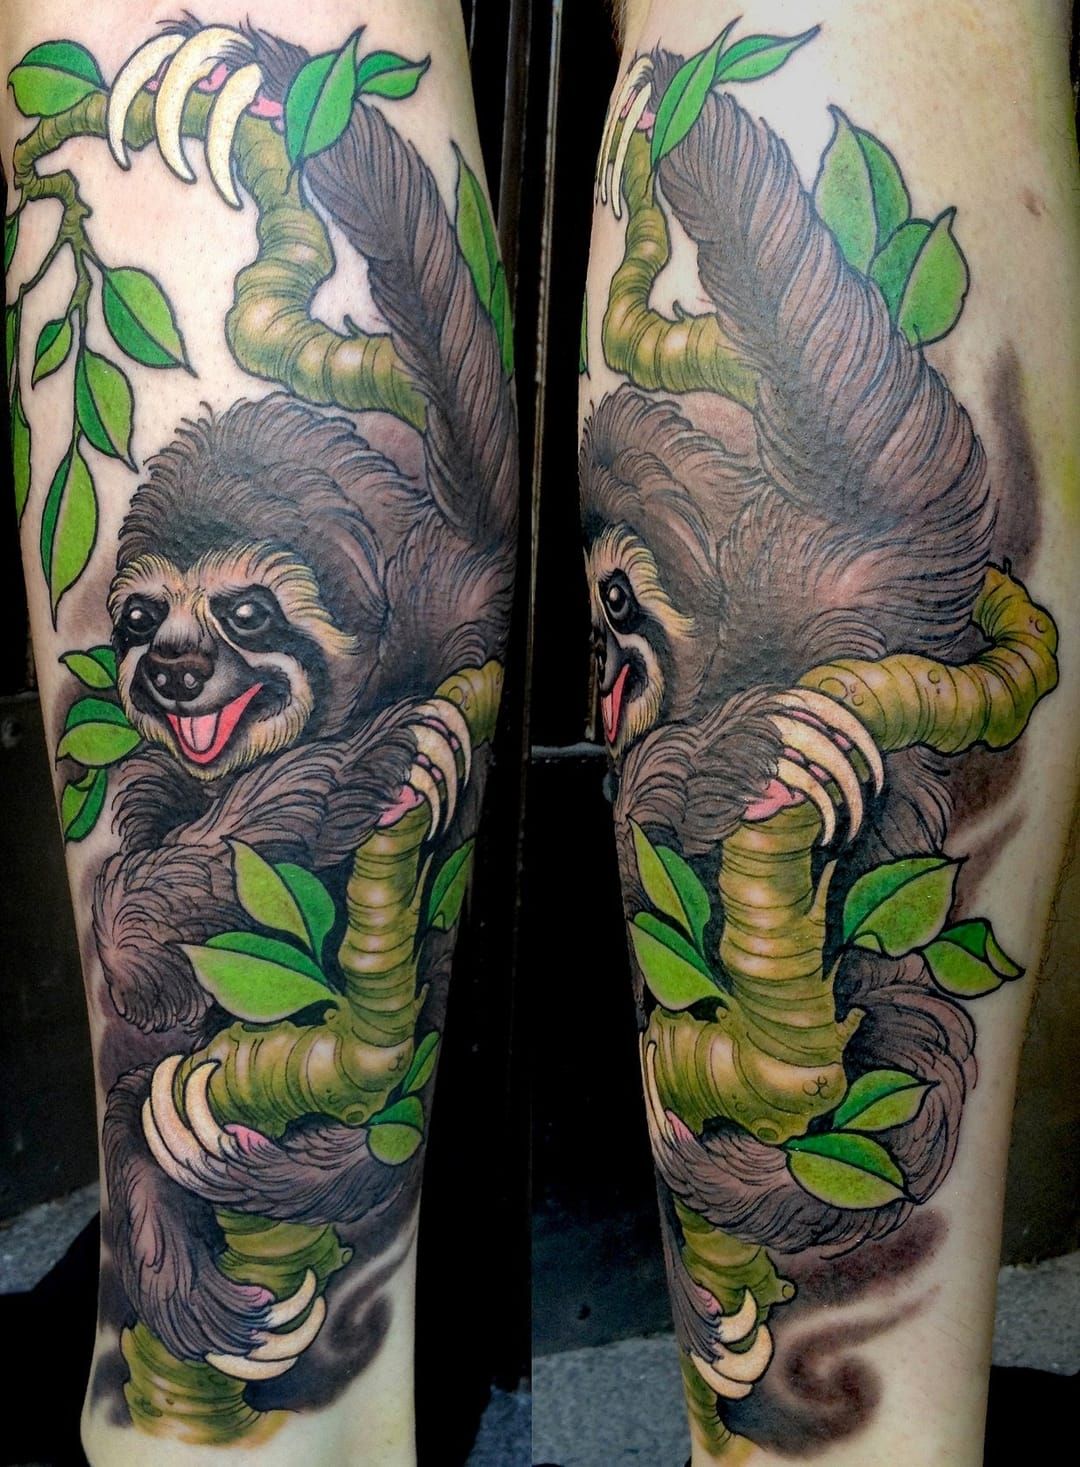 Animal tattoos for women Tattoos for daughters Sloth tattoo